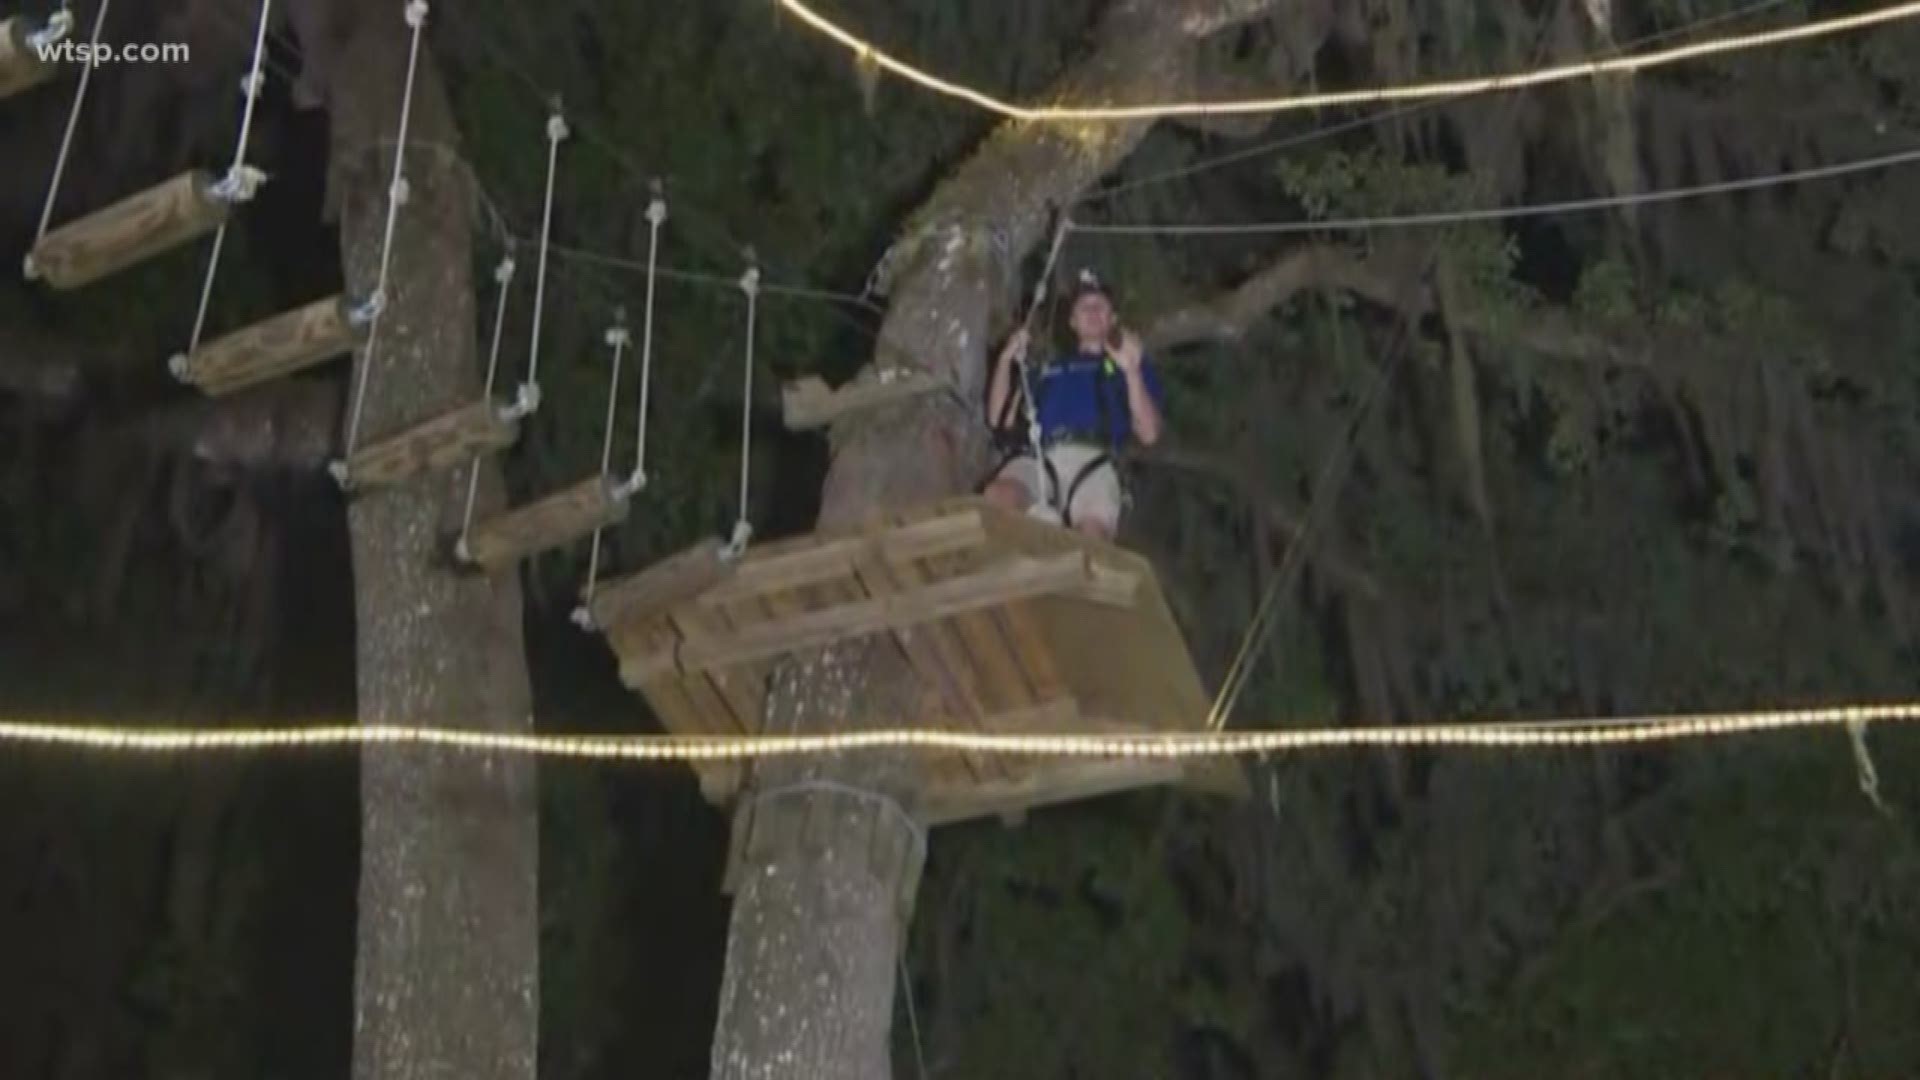 TreeHoppers Aerial Adventure Park is located at 27839 St. Joe Road, Dade City, FL 33525.